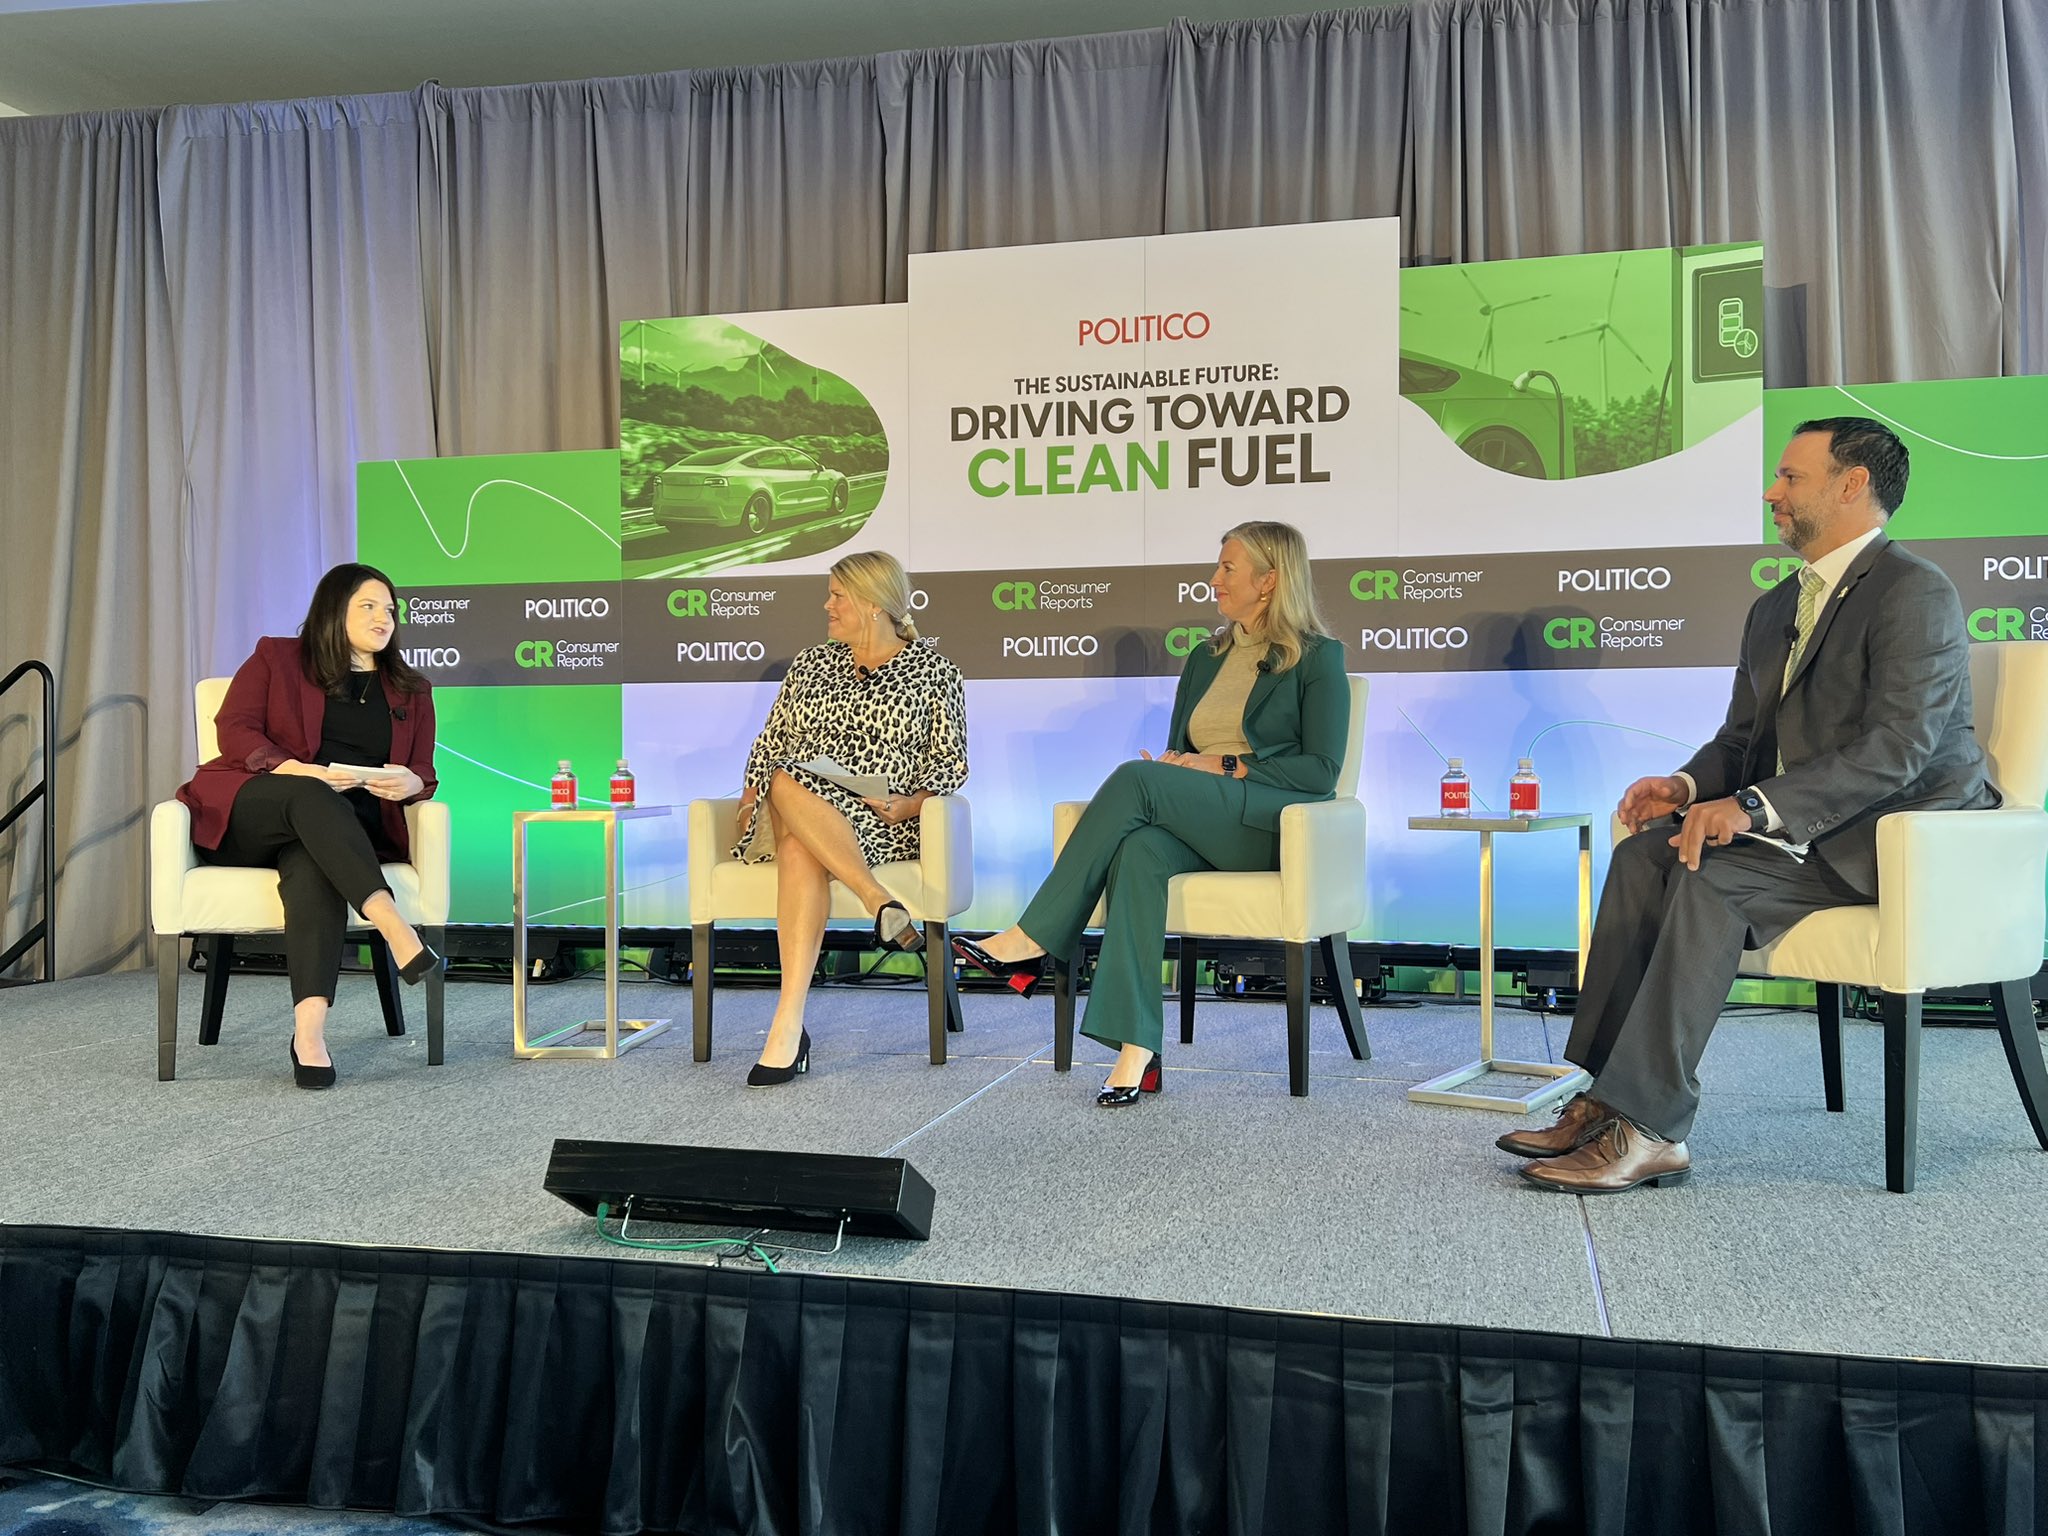 Emily Skor at Politico's Driving Toward Clean Fuel panel event.